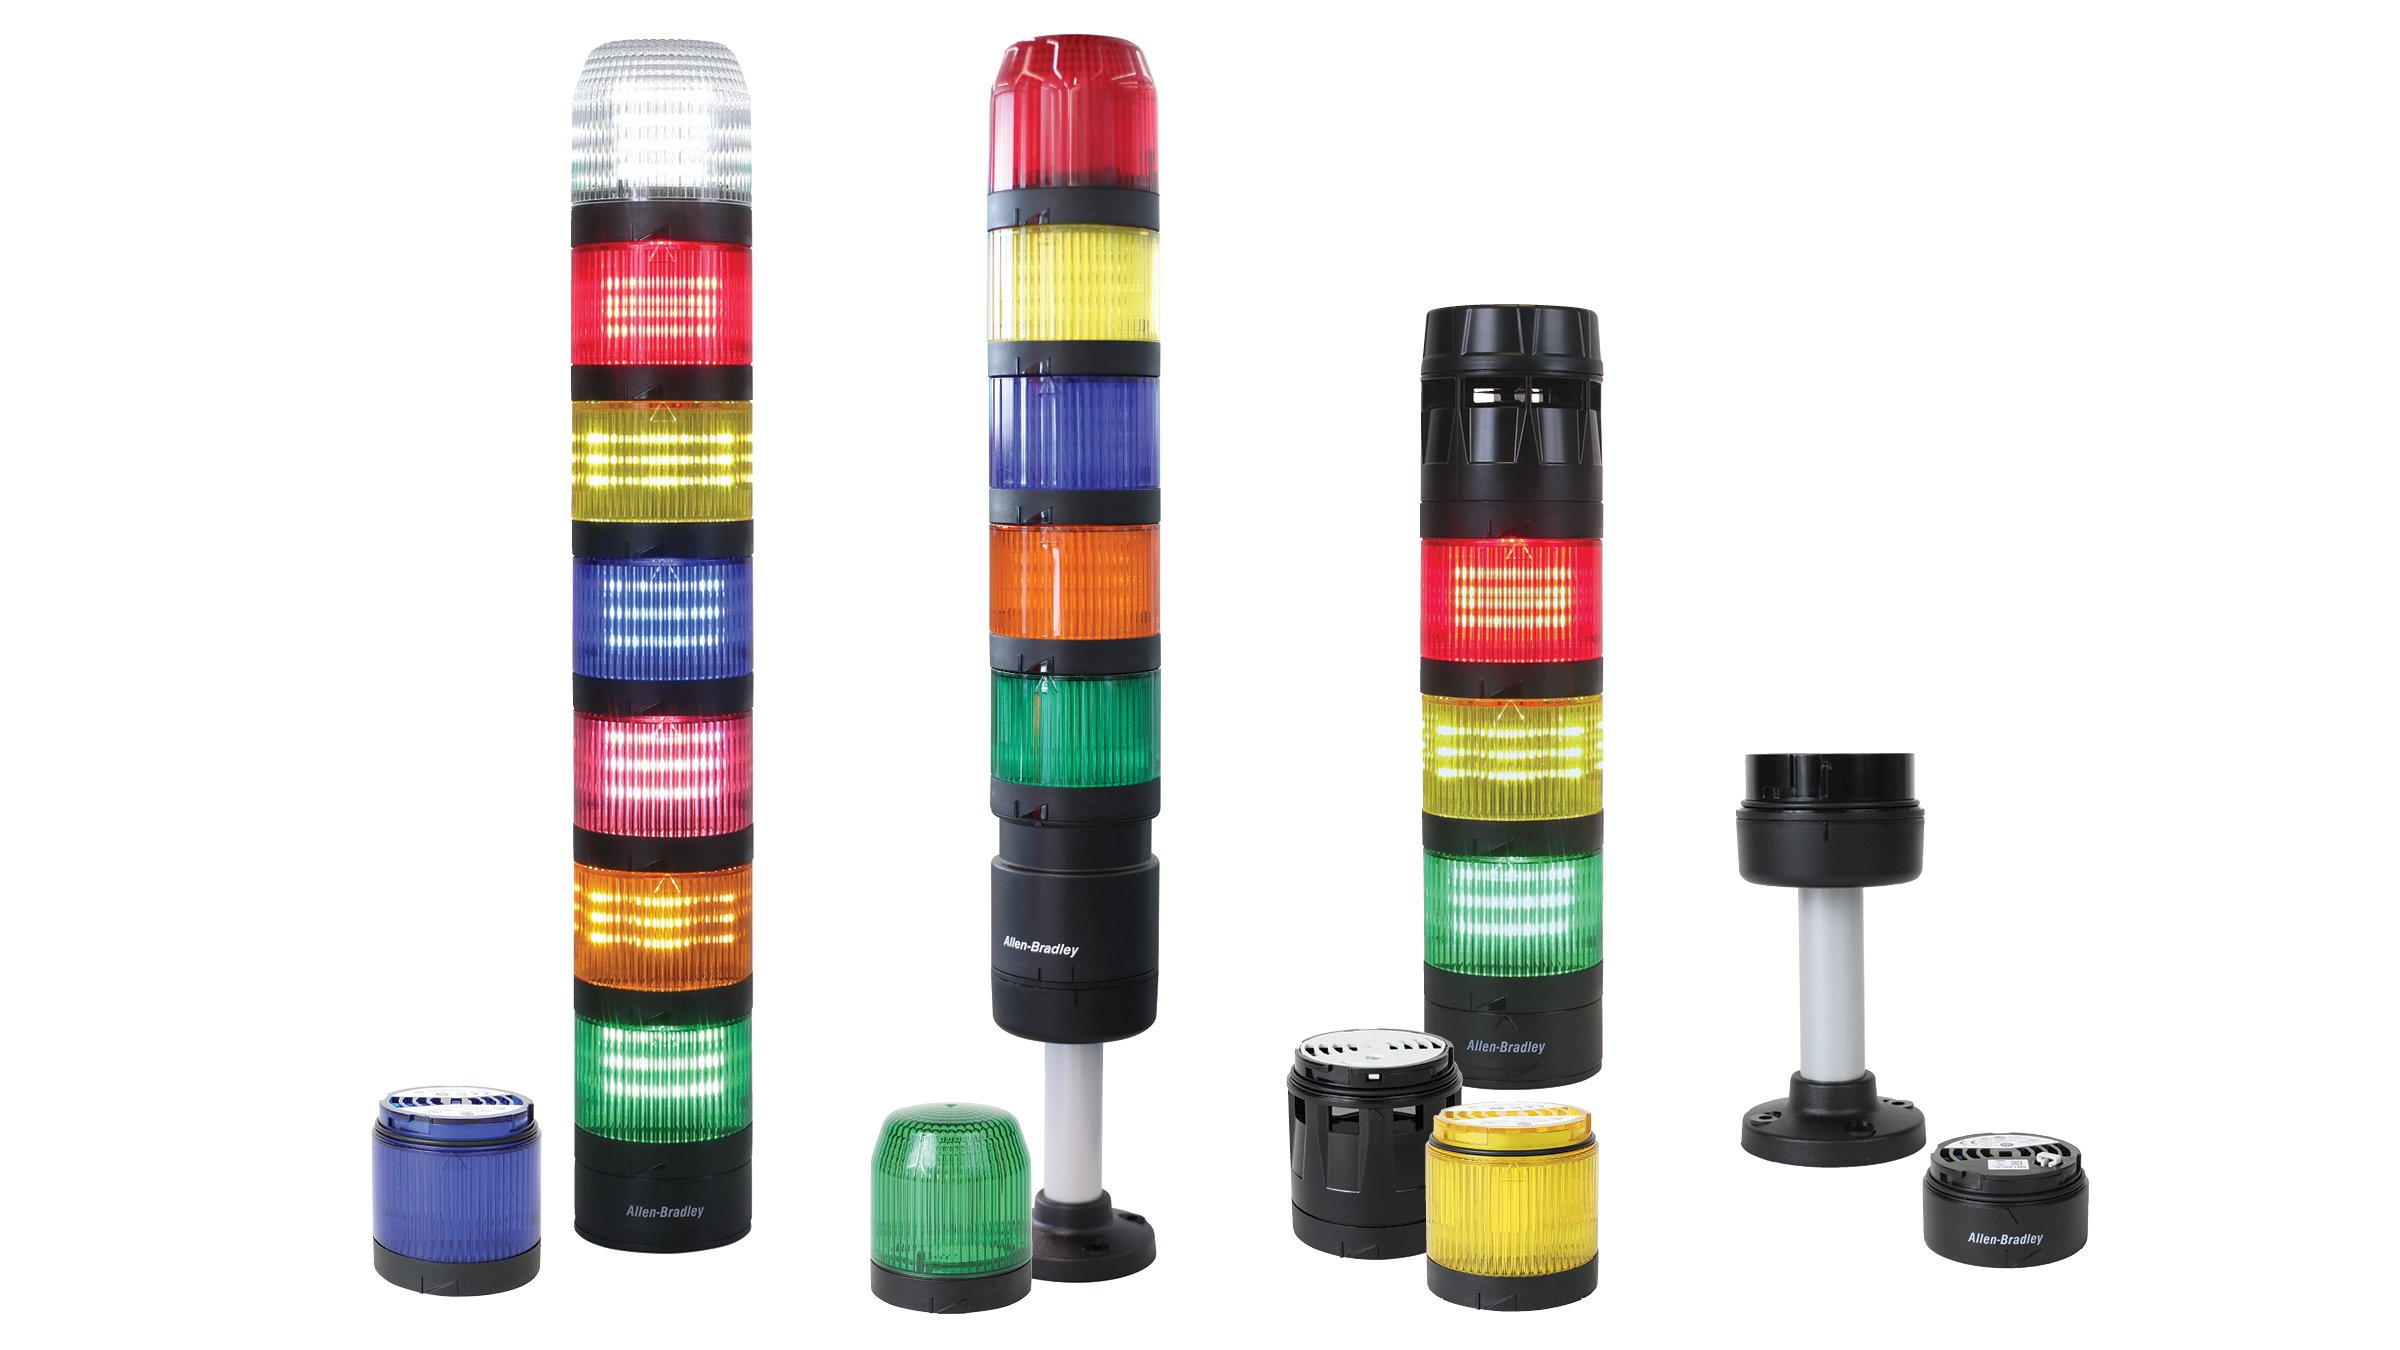 Various multi-colored light modules shown stacked and individually with black caps, alarm module and mounting bases